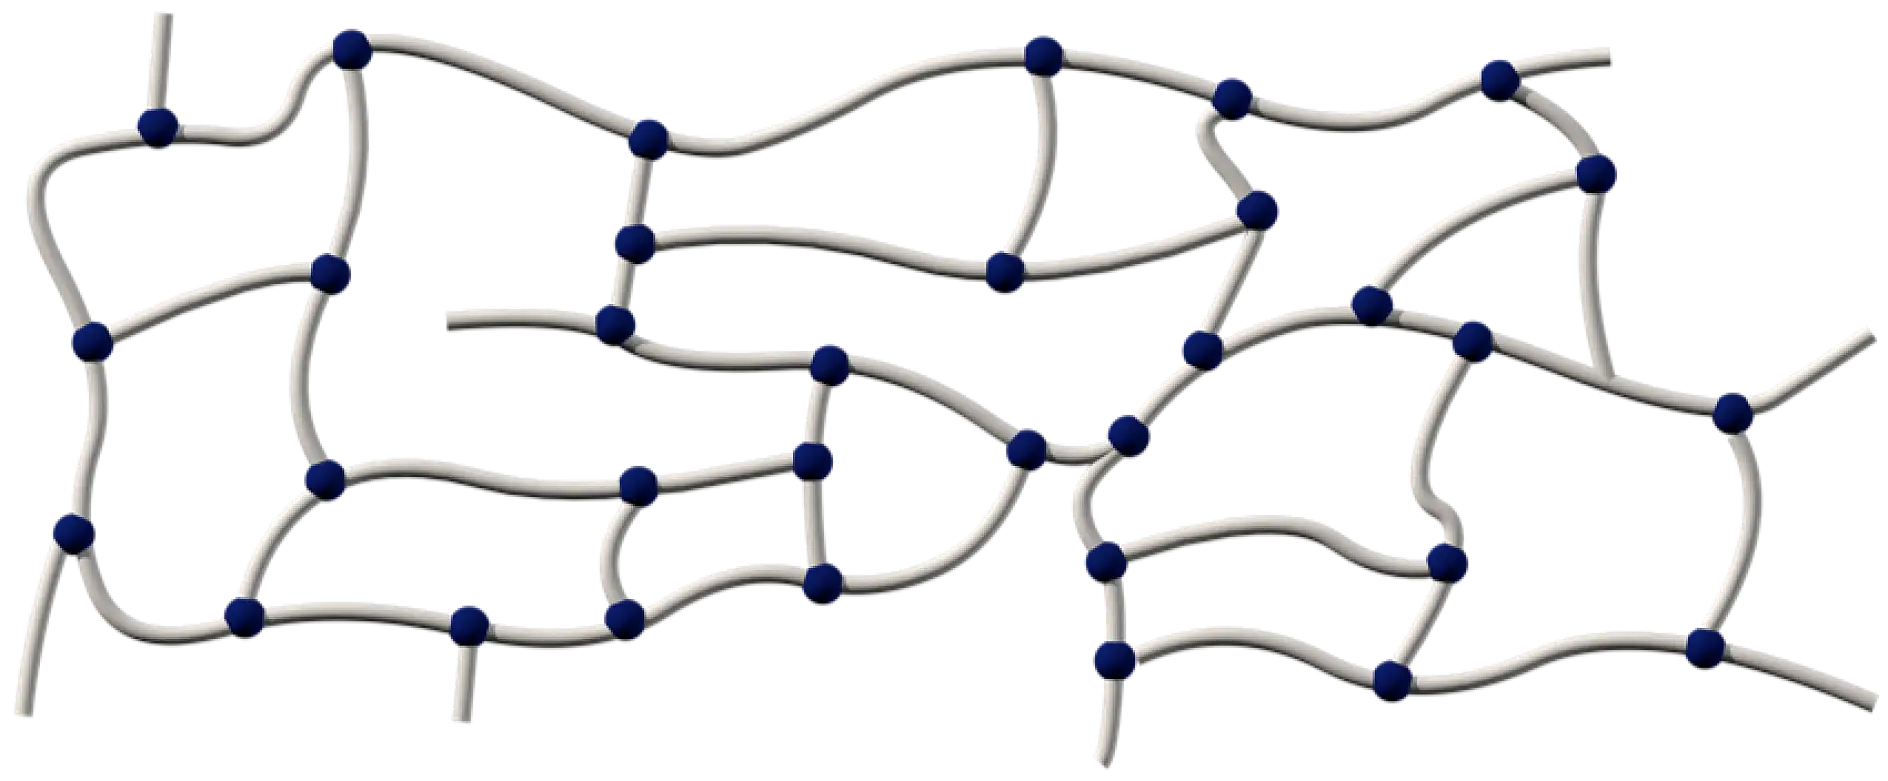 Acrylic adhesives consist of long polymere chains crosslinked by different methods: chemically, by UV-Radiation, or by elektron-beam hardening